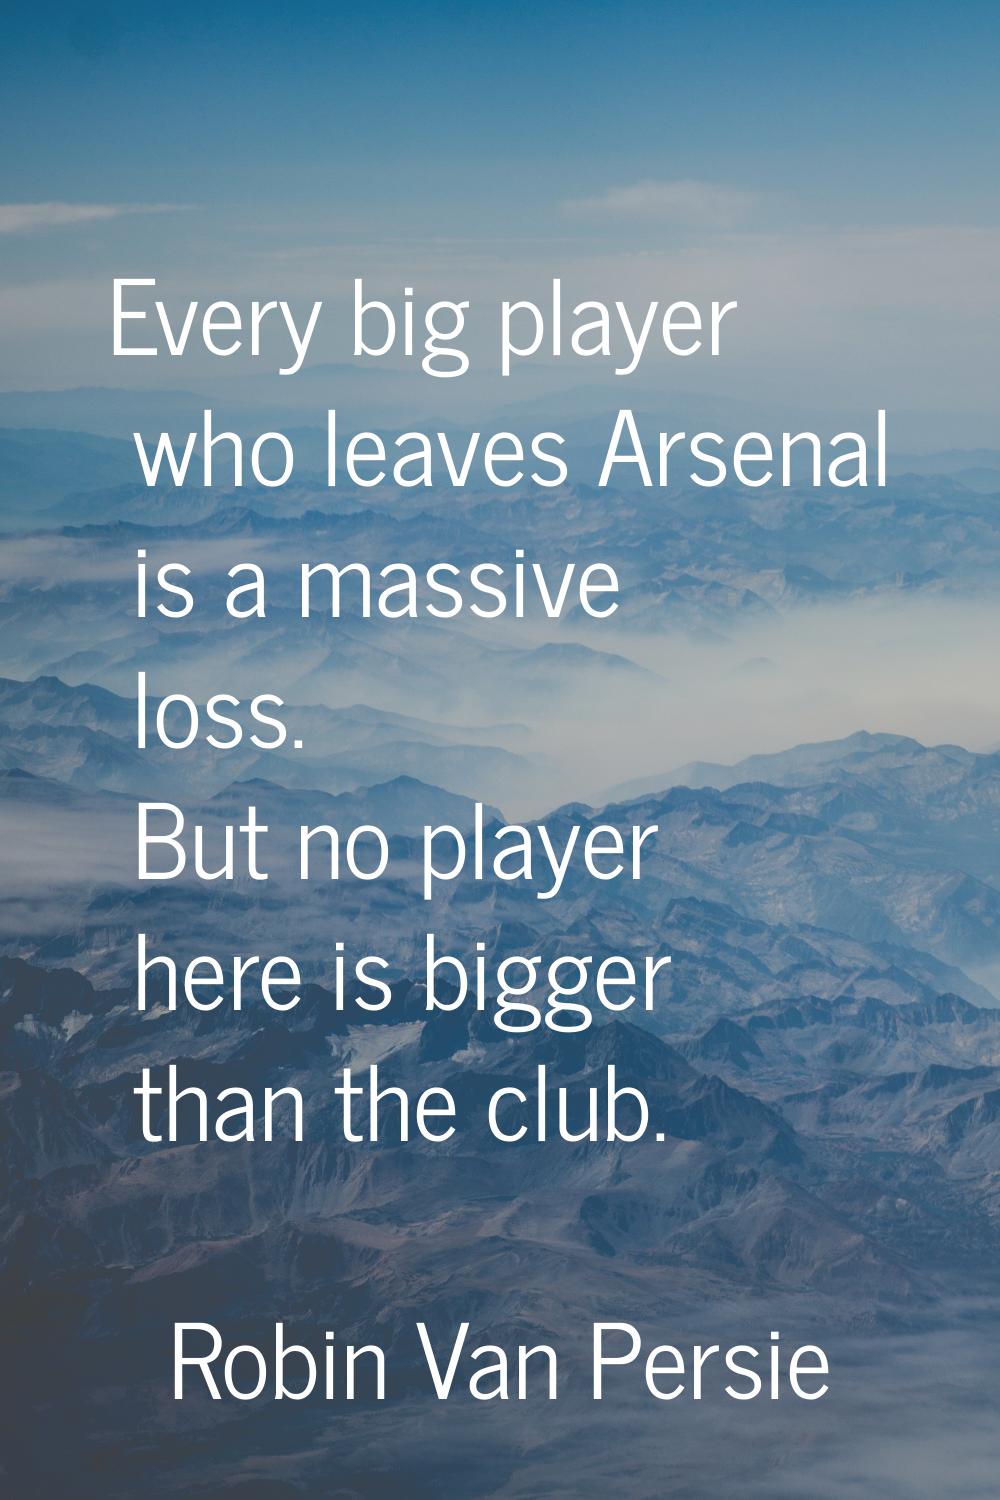 Every big player who leaves Arsenal is a massive loss. But no player here is bigger than the club.